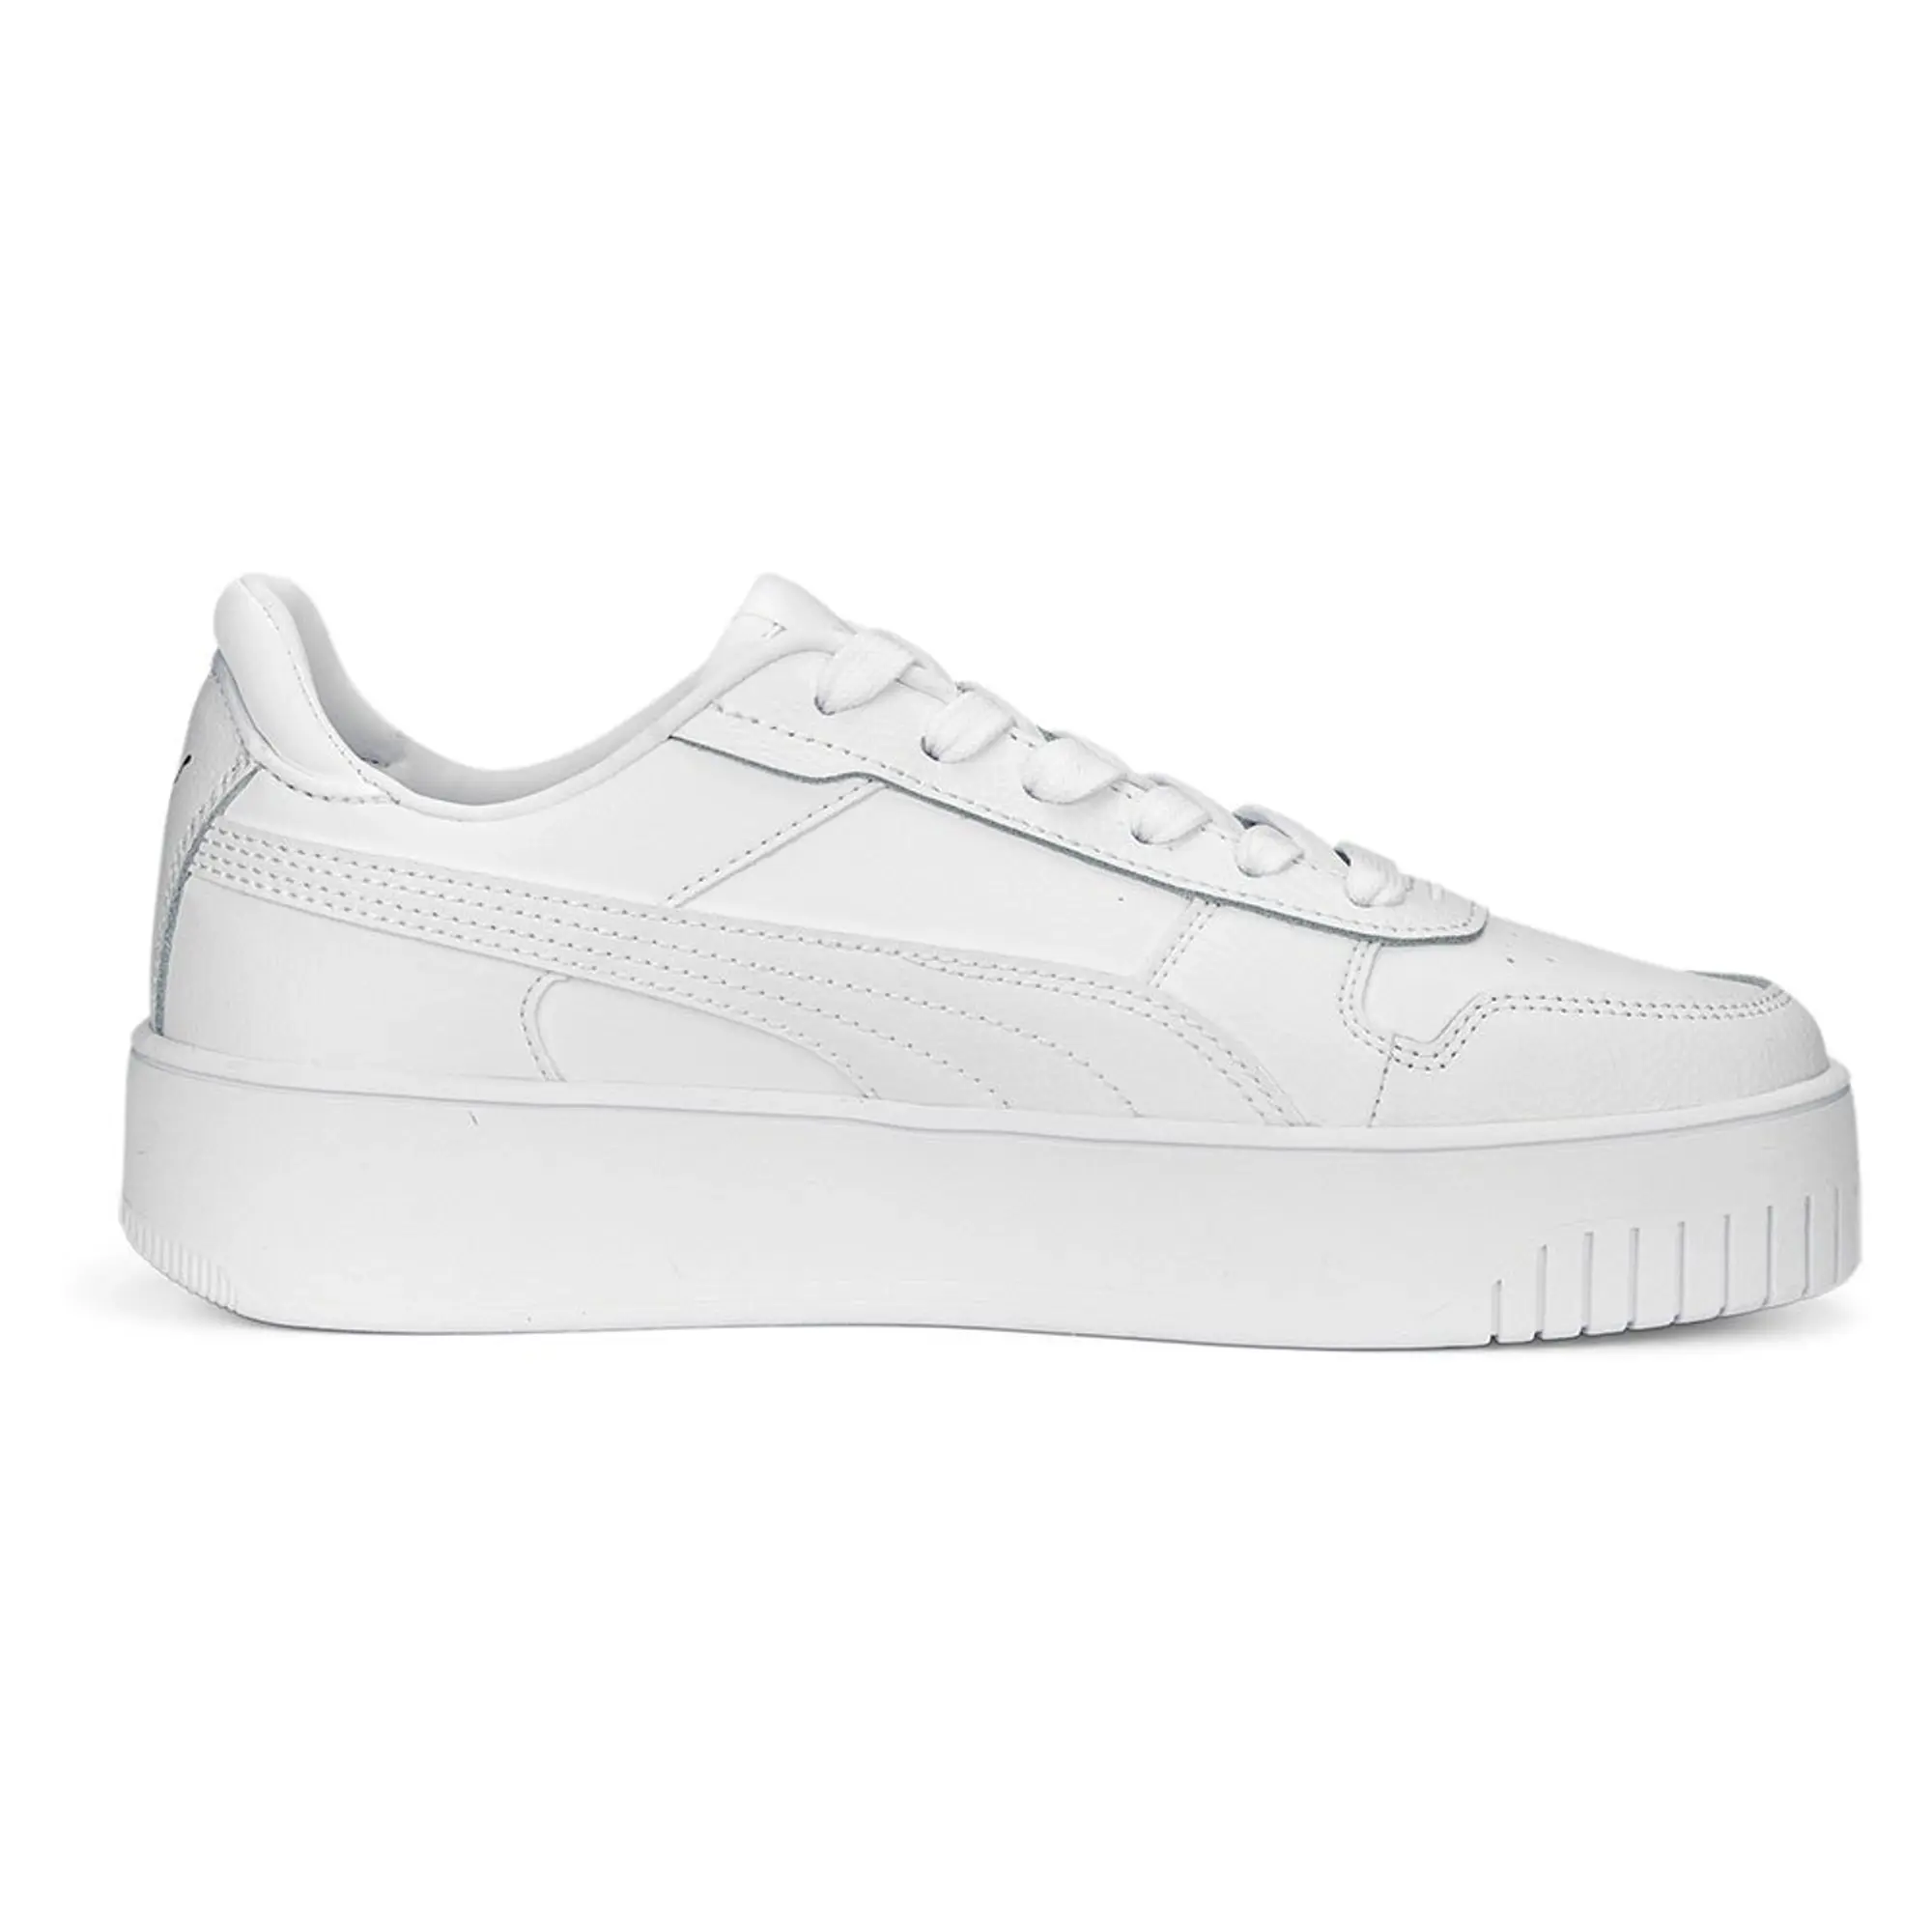 Puma Womens Carina Street Trainers - White Leather (archived)